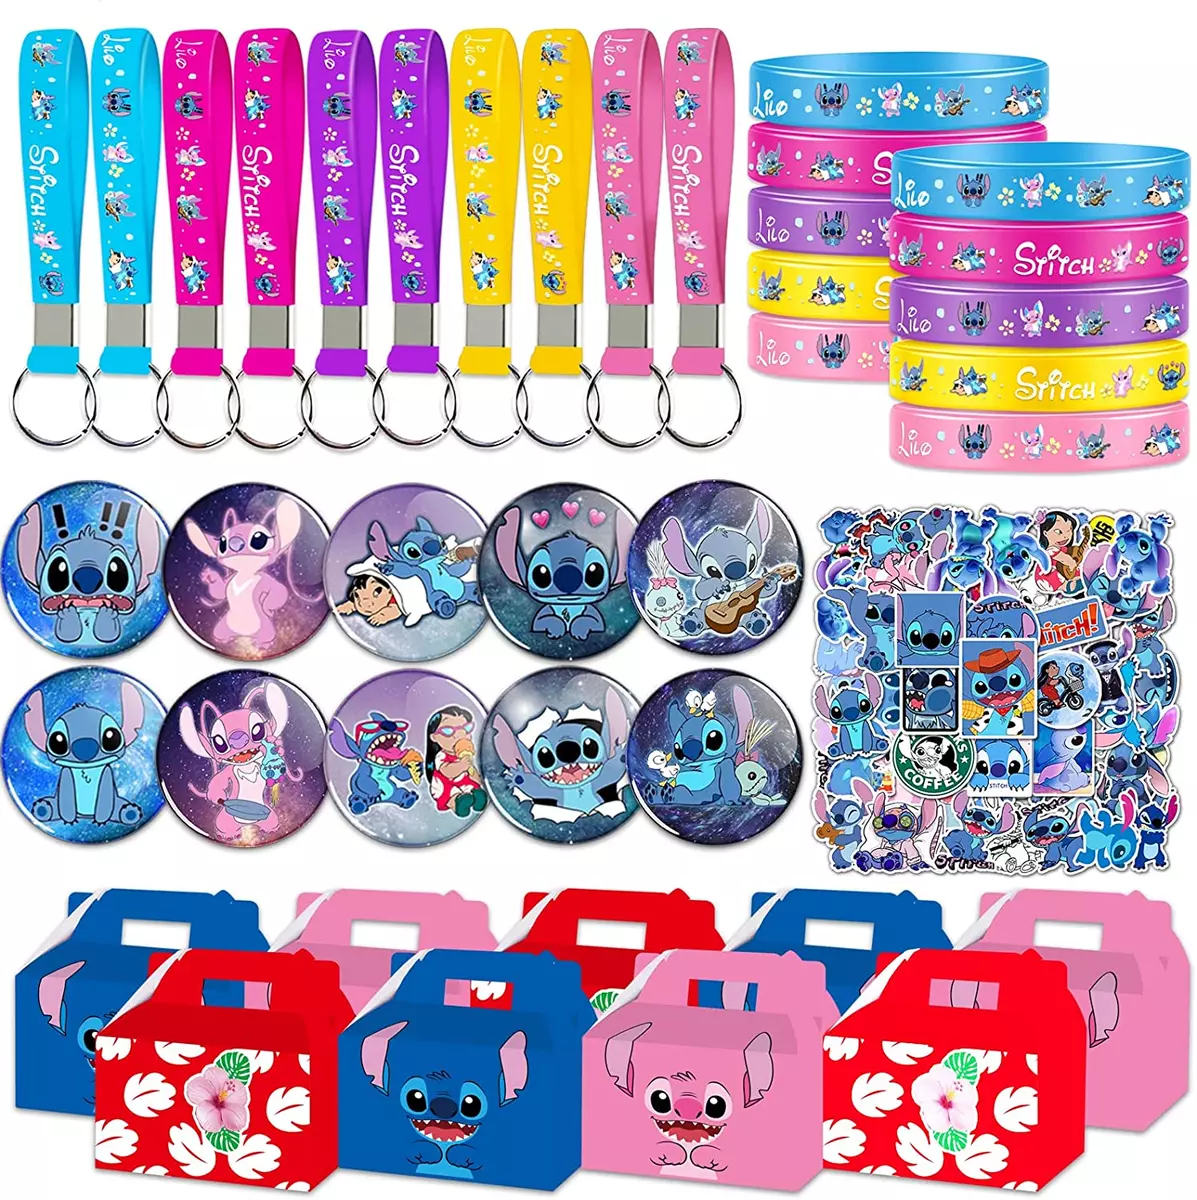 Stitch Party Favor, Lilo Birthday Party Supplies Kit Includes 10